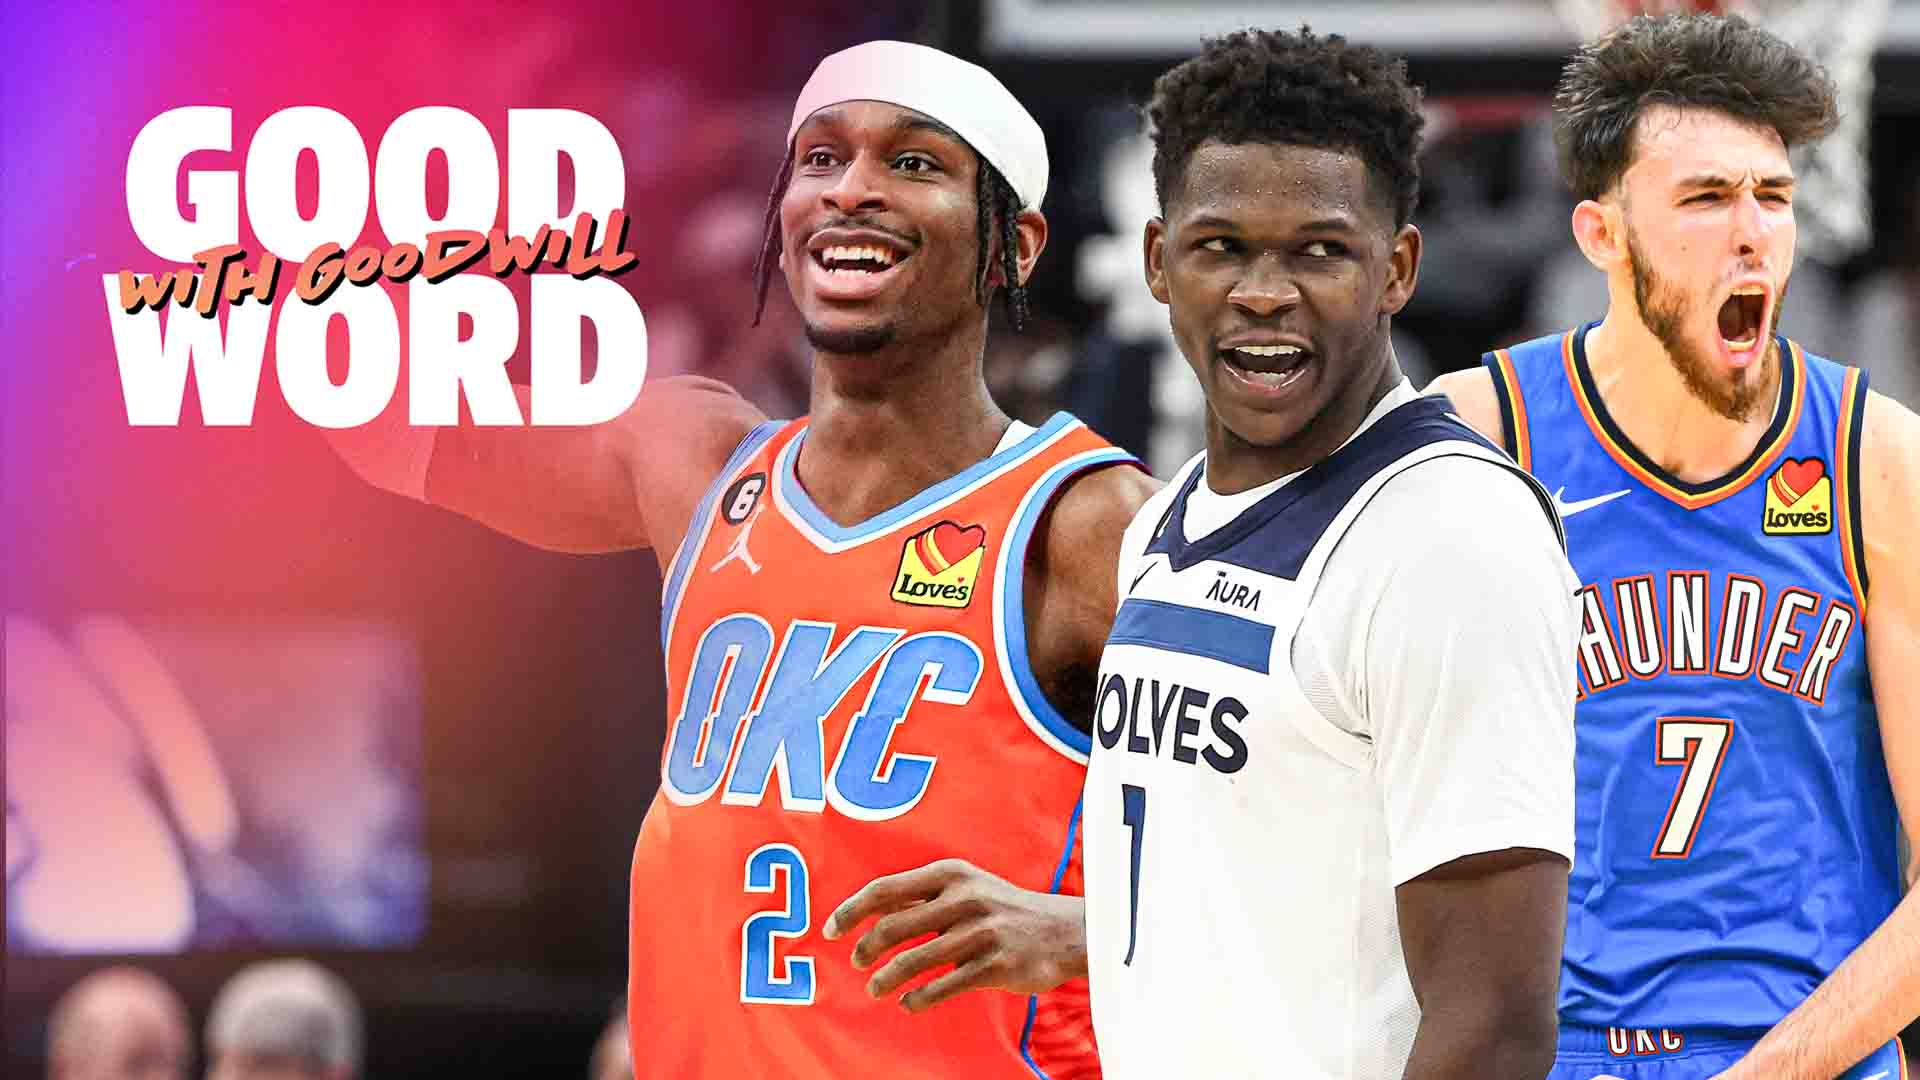 Is the NBA’s next generation of stars taking the stage? | Good Word with Goodwill